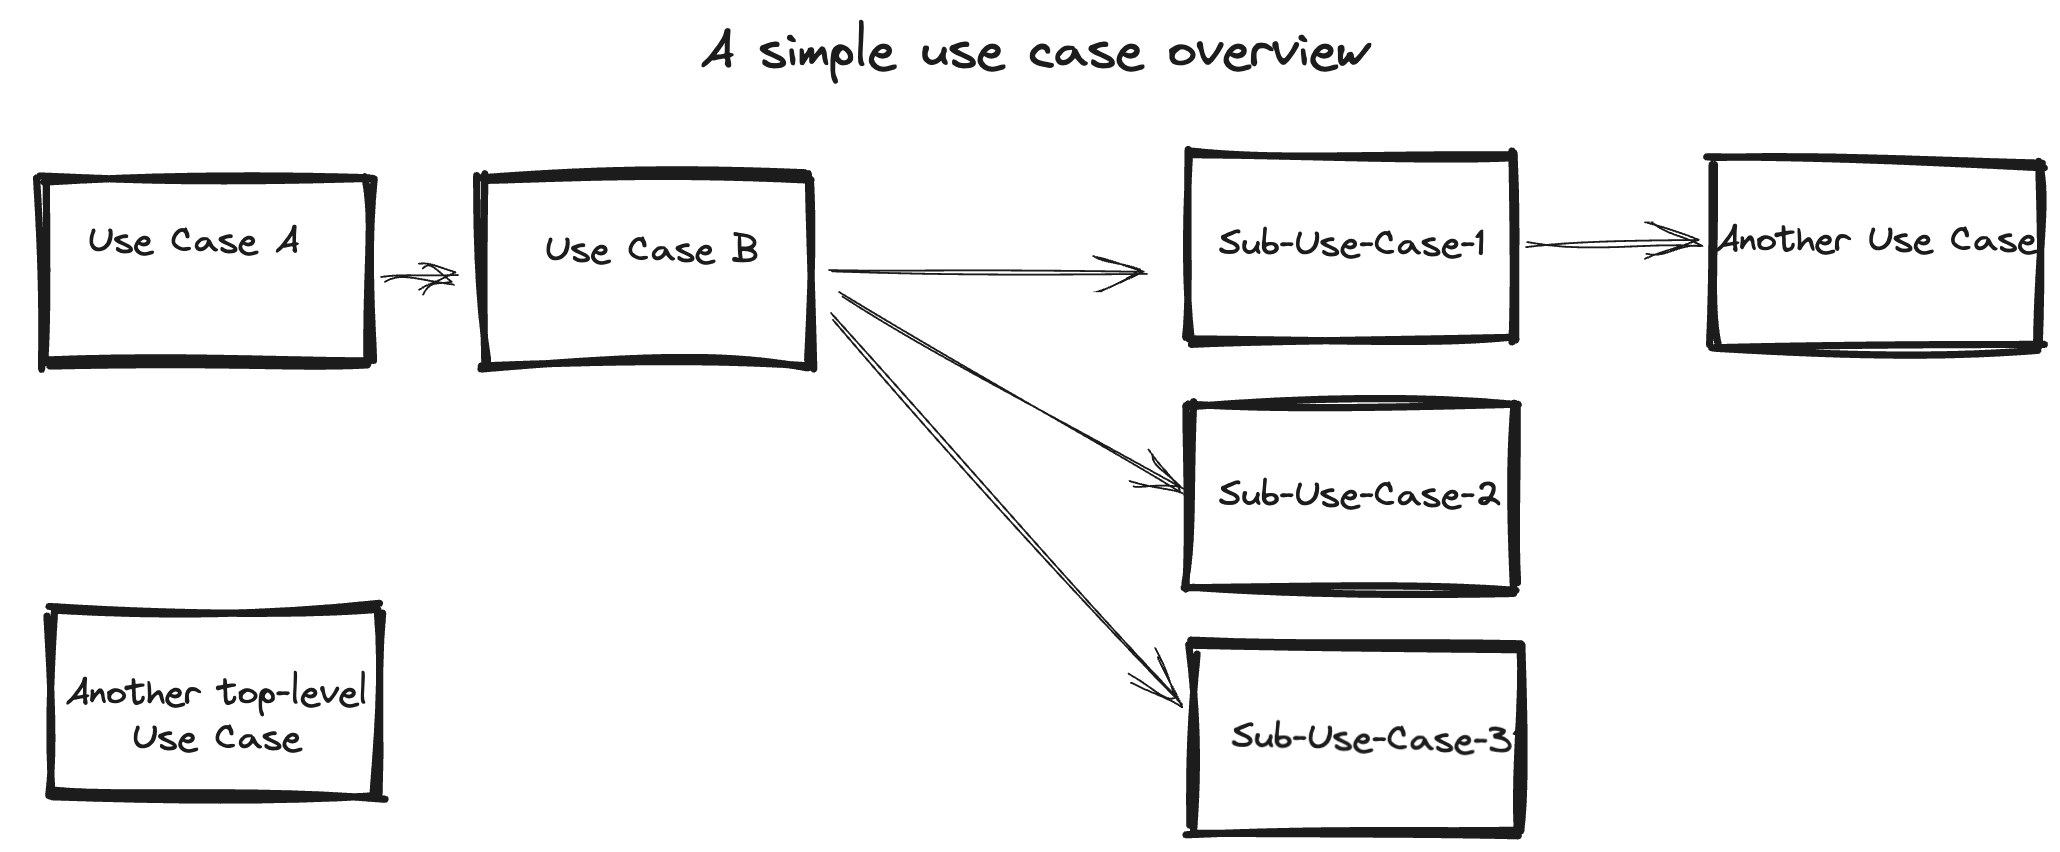 Use Case Overview